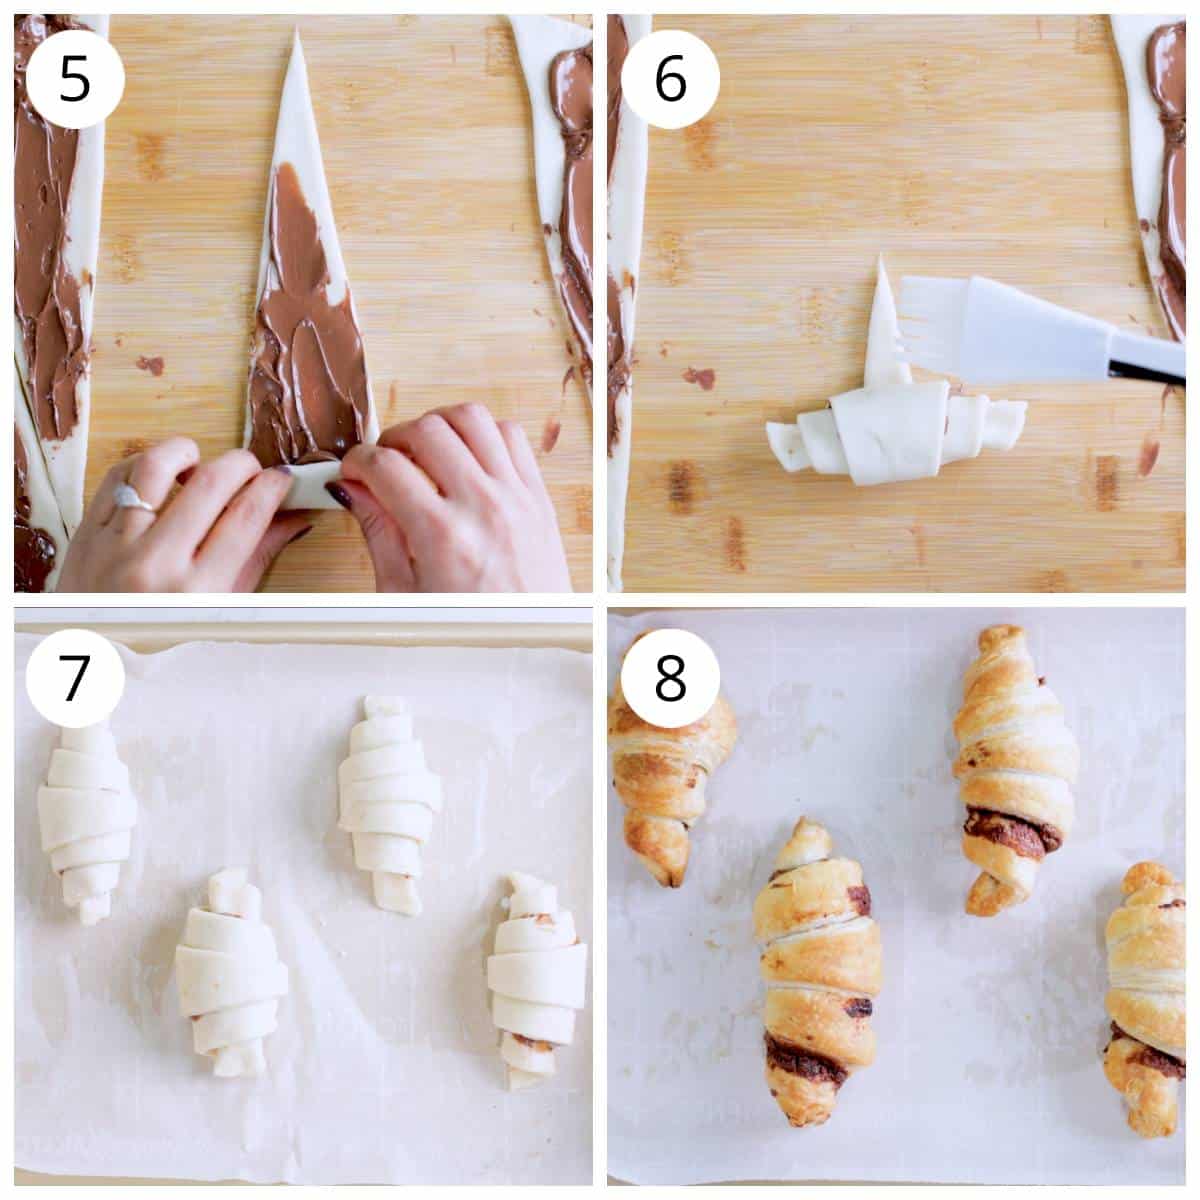 Steps on how to shape and bake nutella croissants